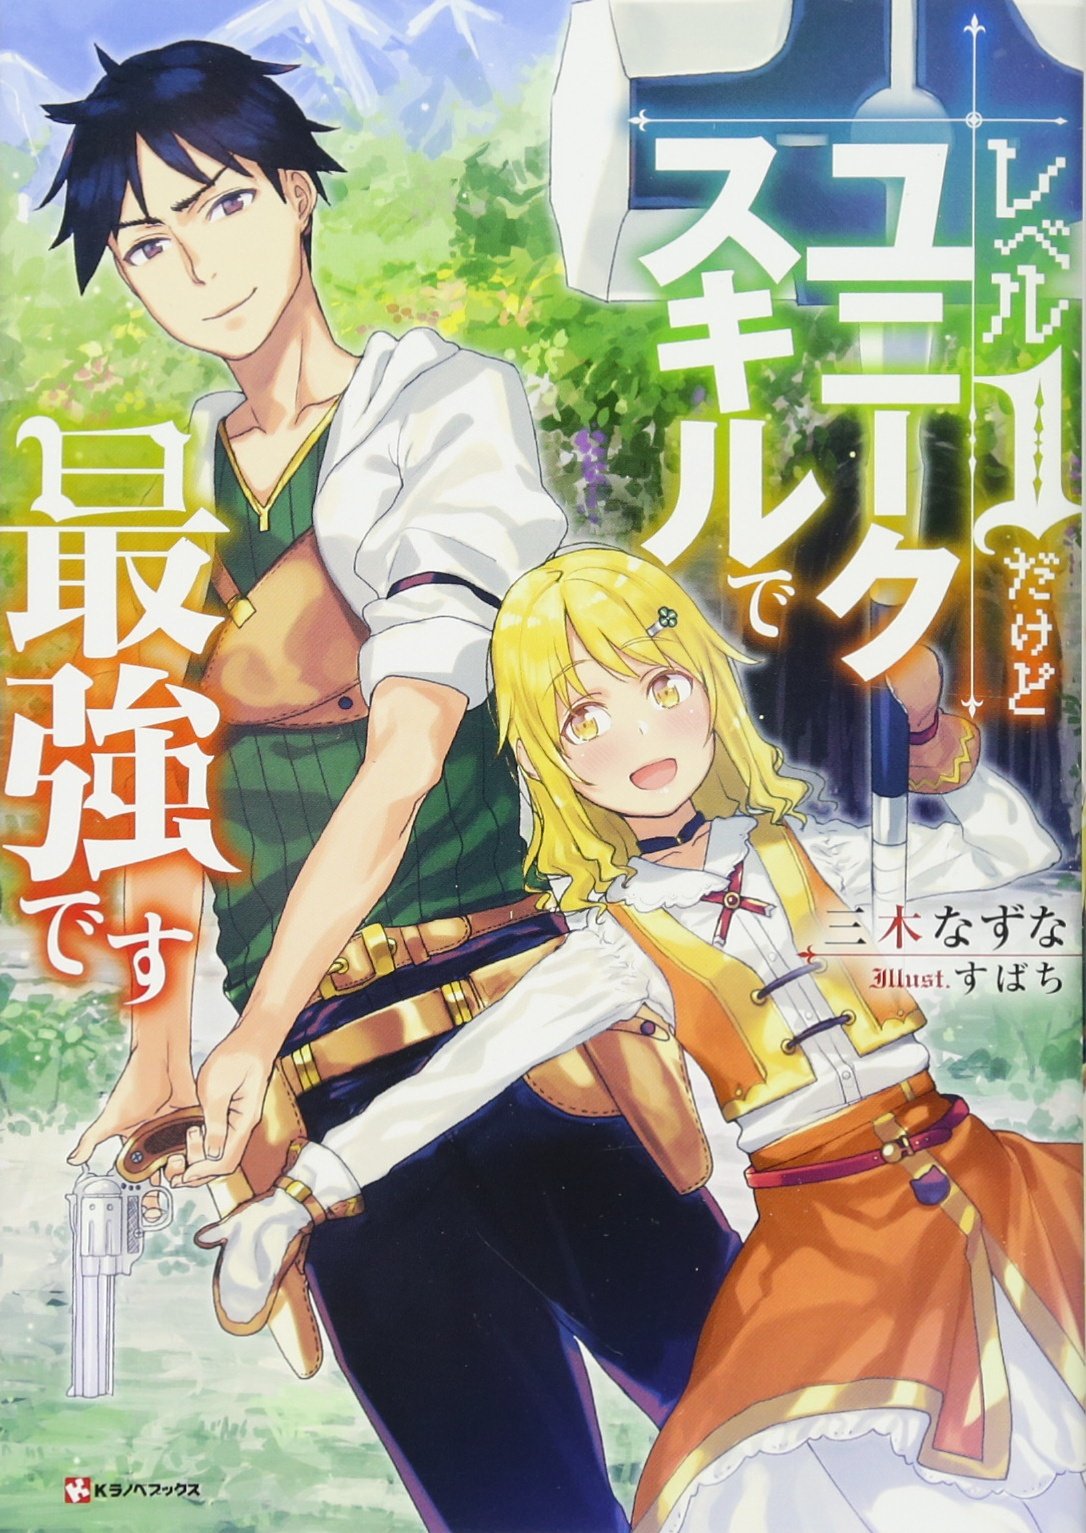 A key visual for the upcoming My Unique Skill Makes Me OP even at Level 1 TV anime featuring the main characters Ryota Sato and Emily Brown posing on a sunny day outside the ruins of a fantasy town. Ryota wields a revolver and is dressed in casual clothes, while Emily wields a gigantic hammer and wears leather mittens and an adventuring outfit.